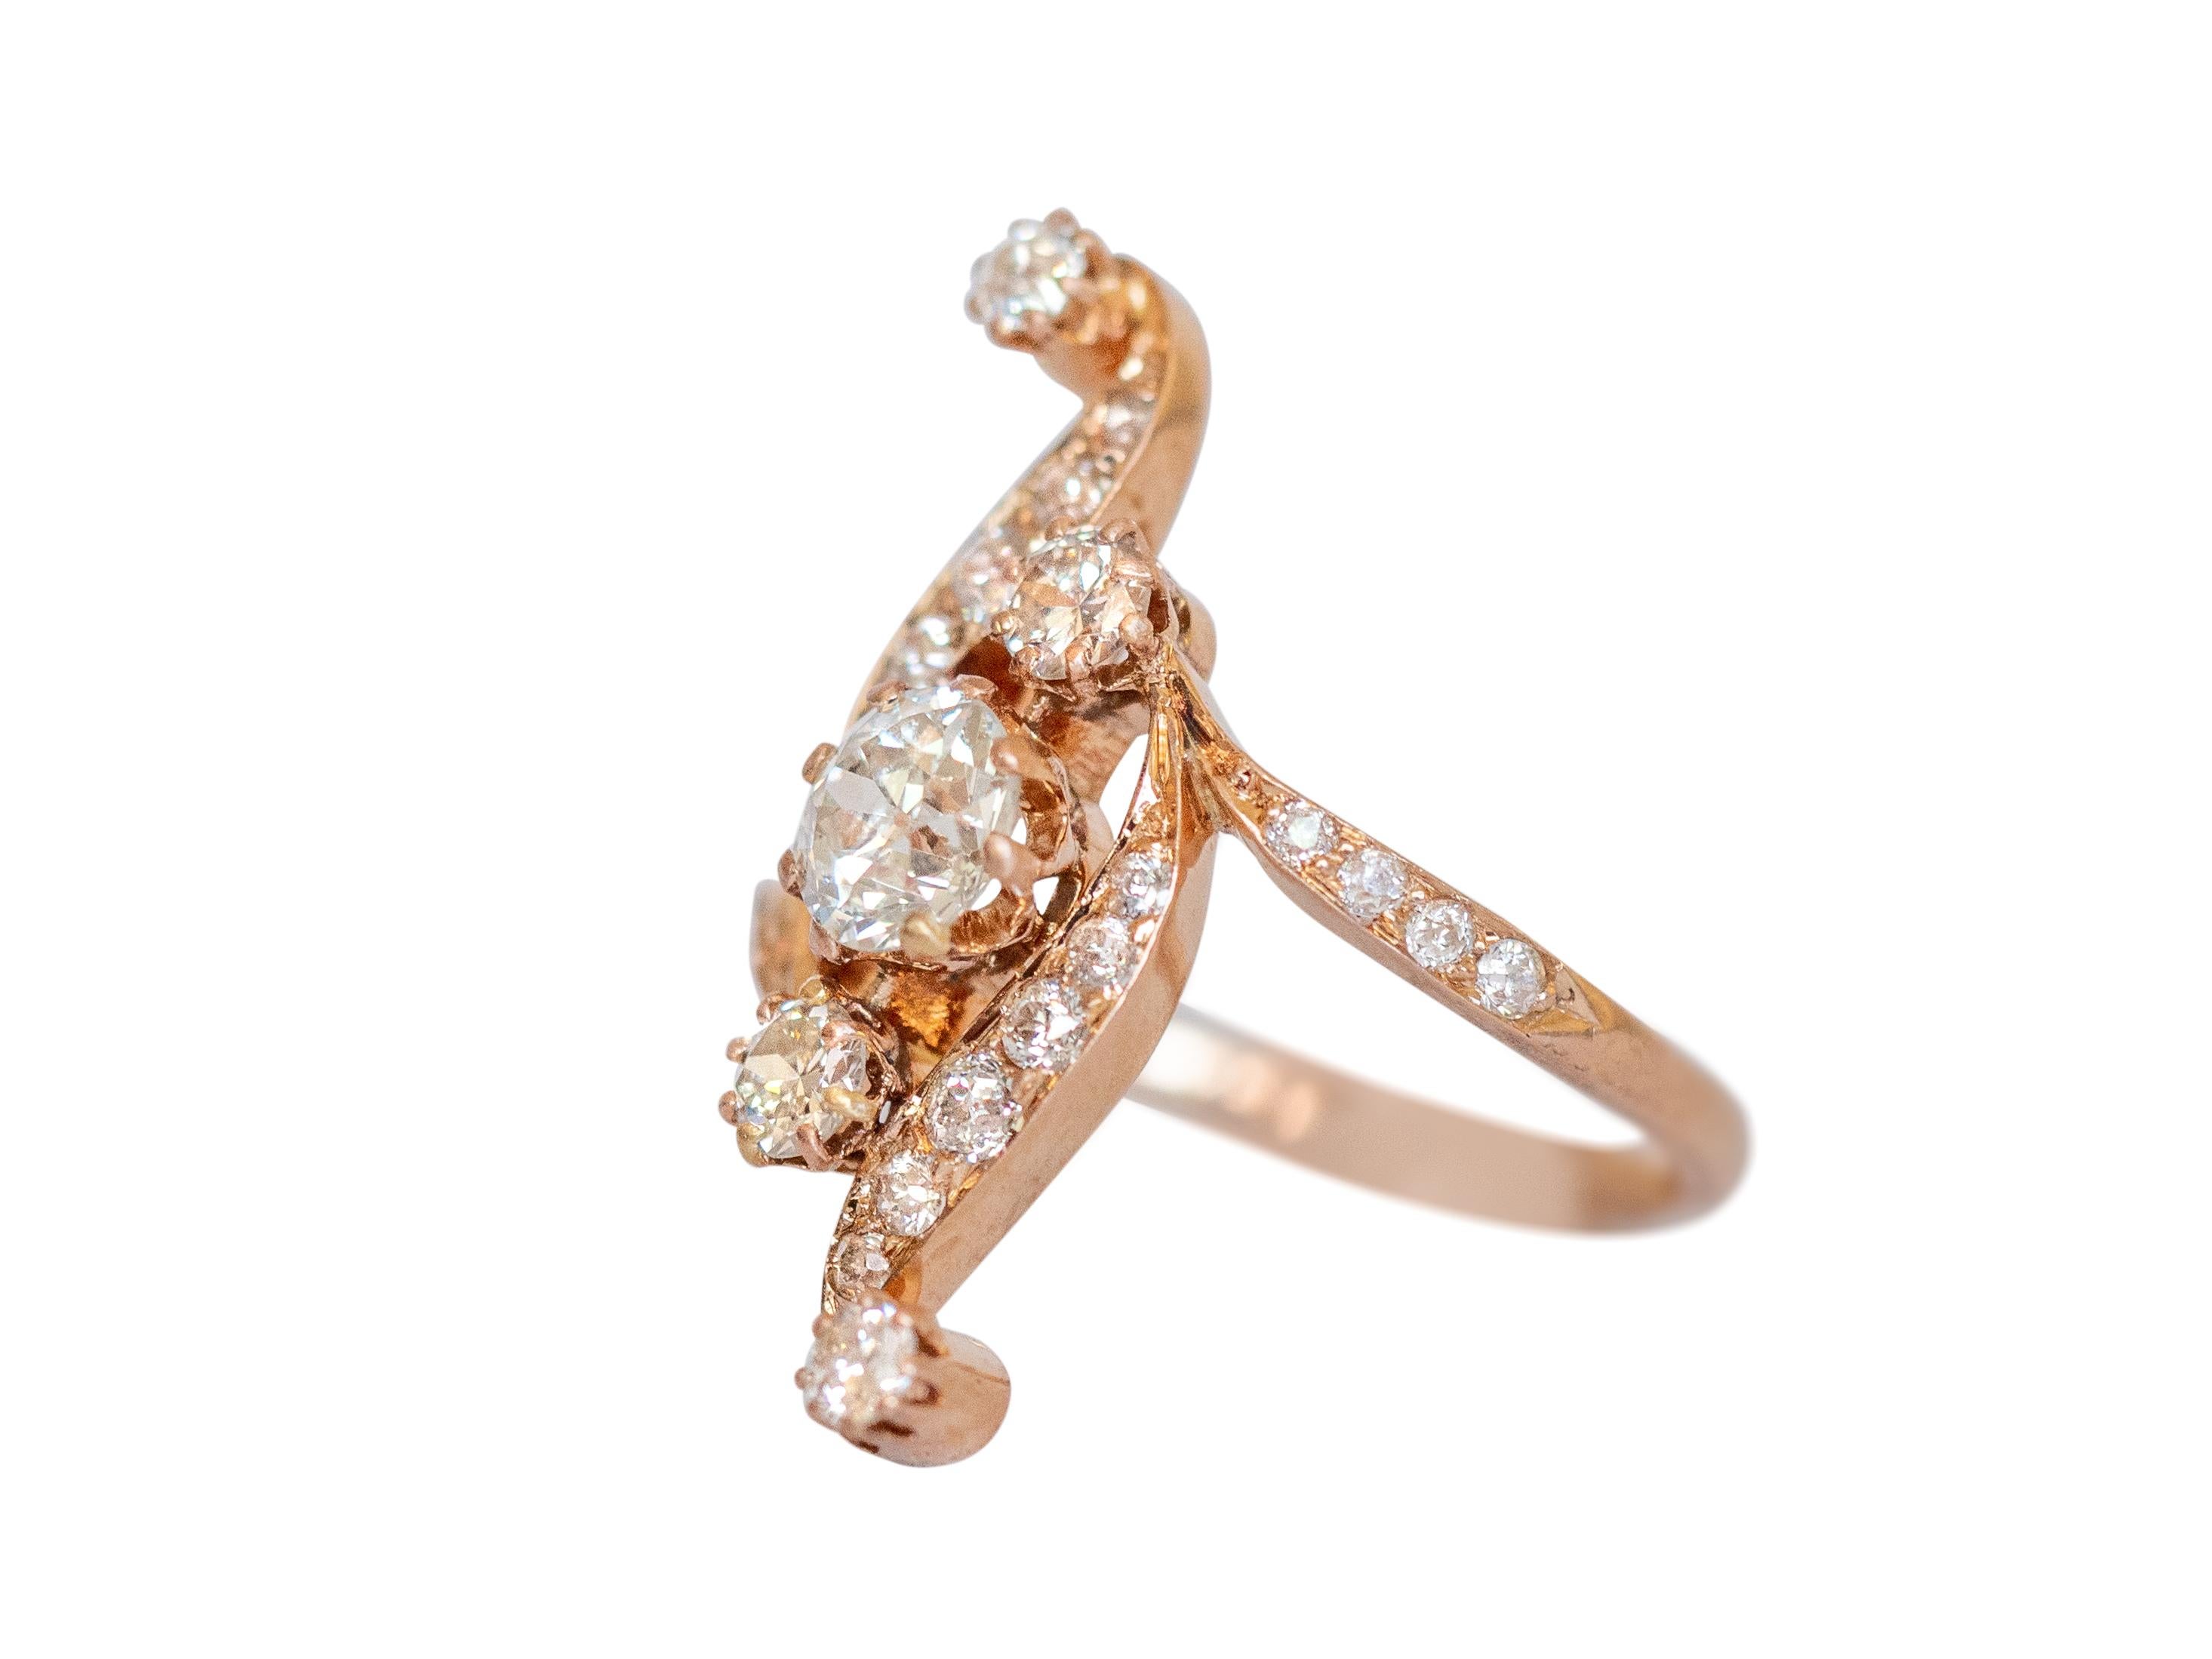 Ring Size: 6
Metal Type: 14k Rose Gold [Hallmarked, and Tested]
Weight:  4 grams

Center Diamond Details:
Weight: .65 carat
Cut: Old European Brilliant
Color: I-J
Clarity: VS2

Side Diamond Details:
Weight: .40 carat, total weight
Cut: Old European